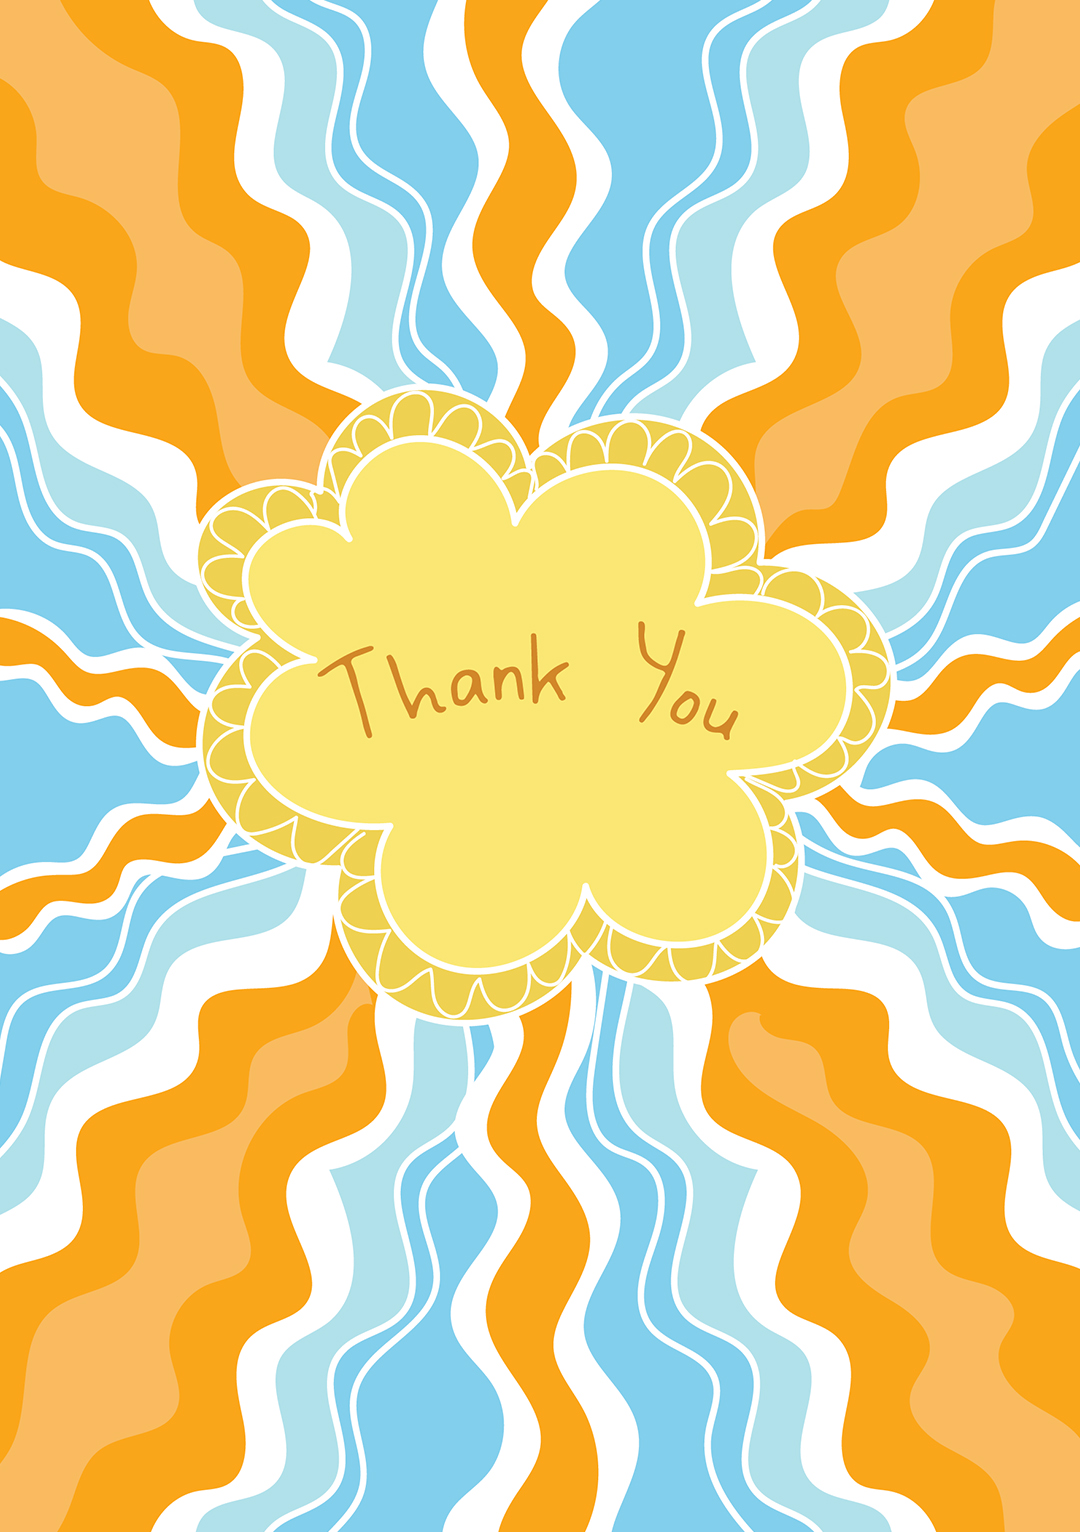 Thank You Design Greeting Card